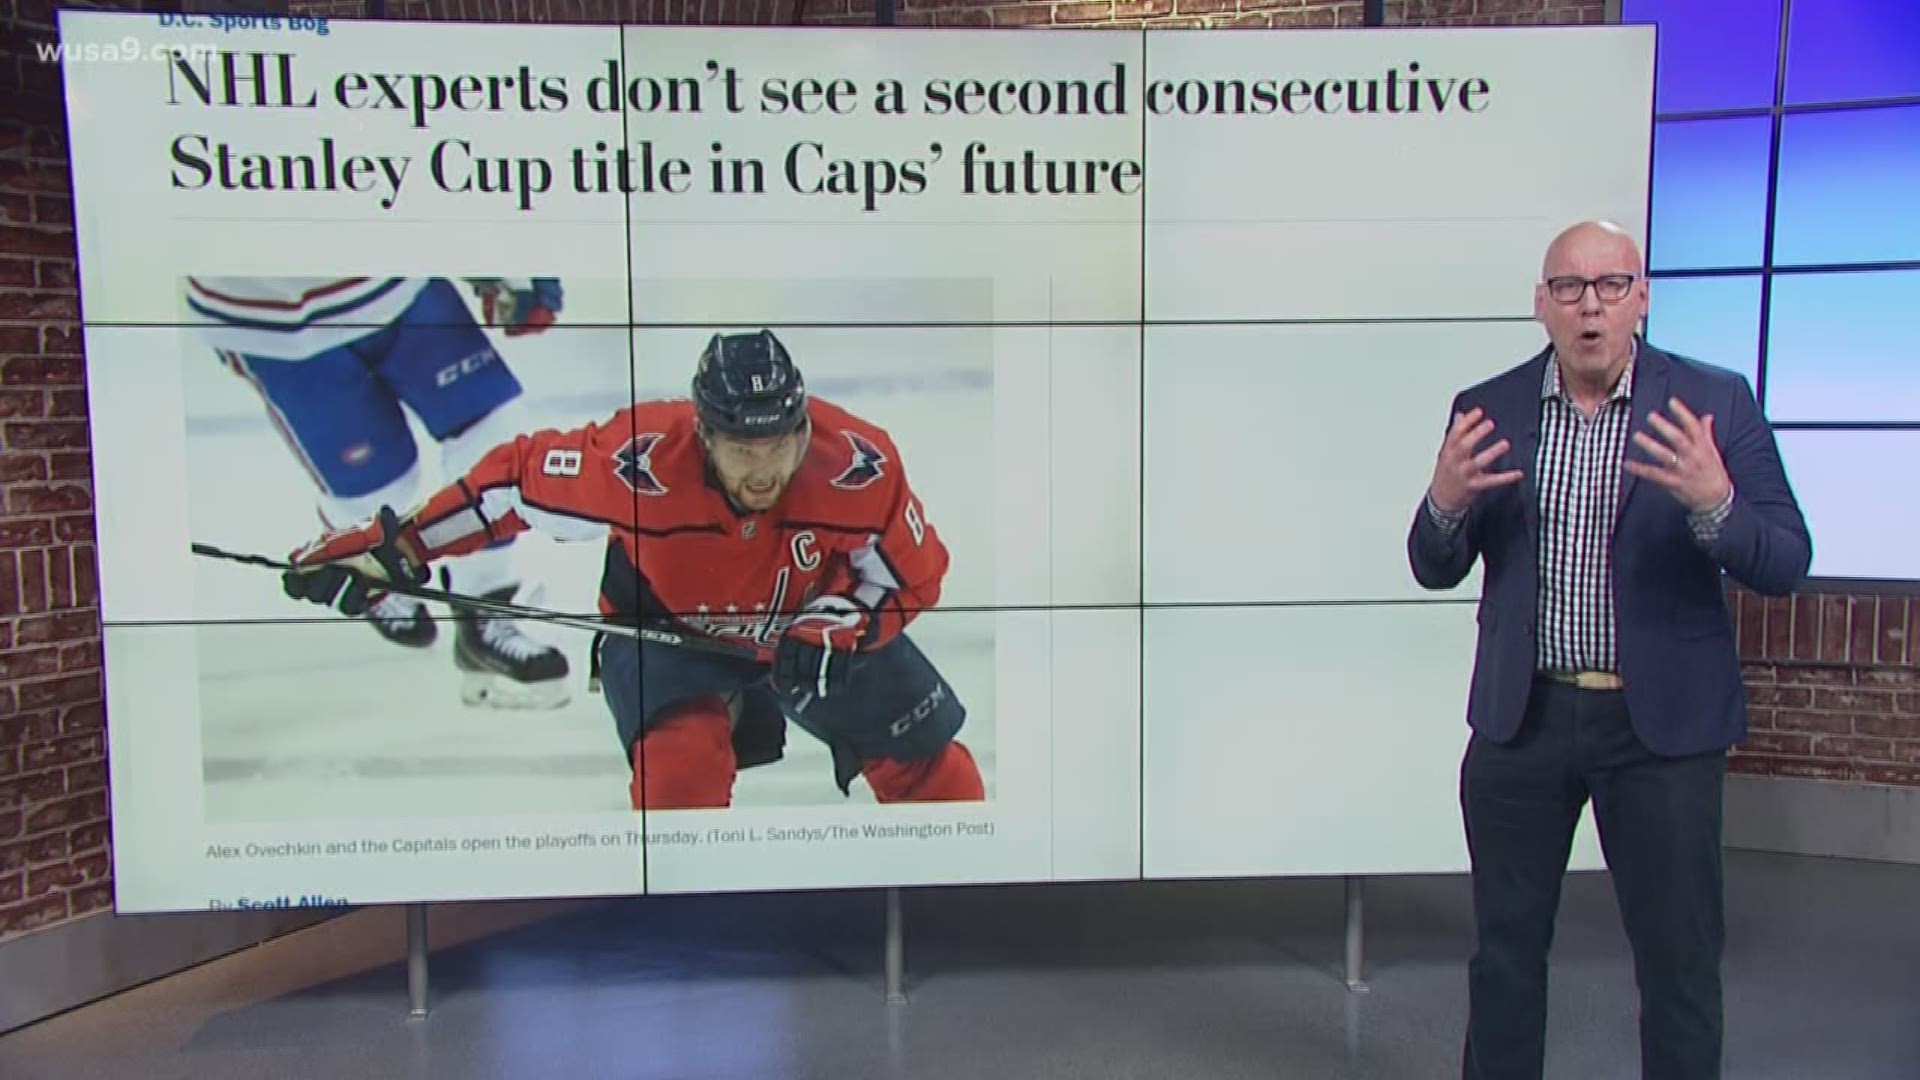 While DC is pumped up about the possibility of another Stanley Cup Championship, it seems there are some naysayers out there. Mike Wise has some choice words for them.